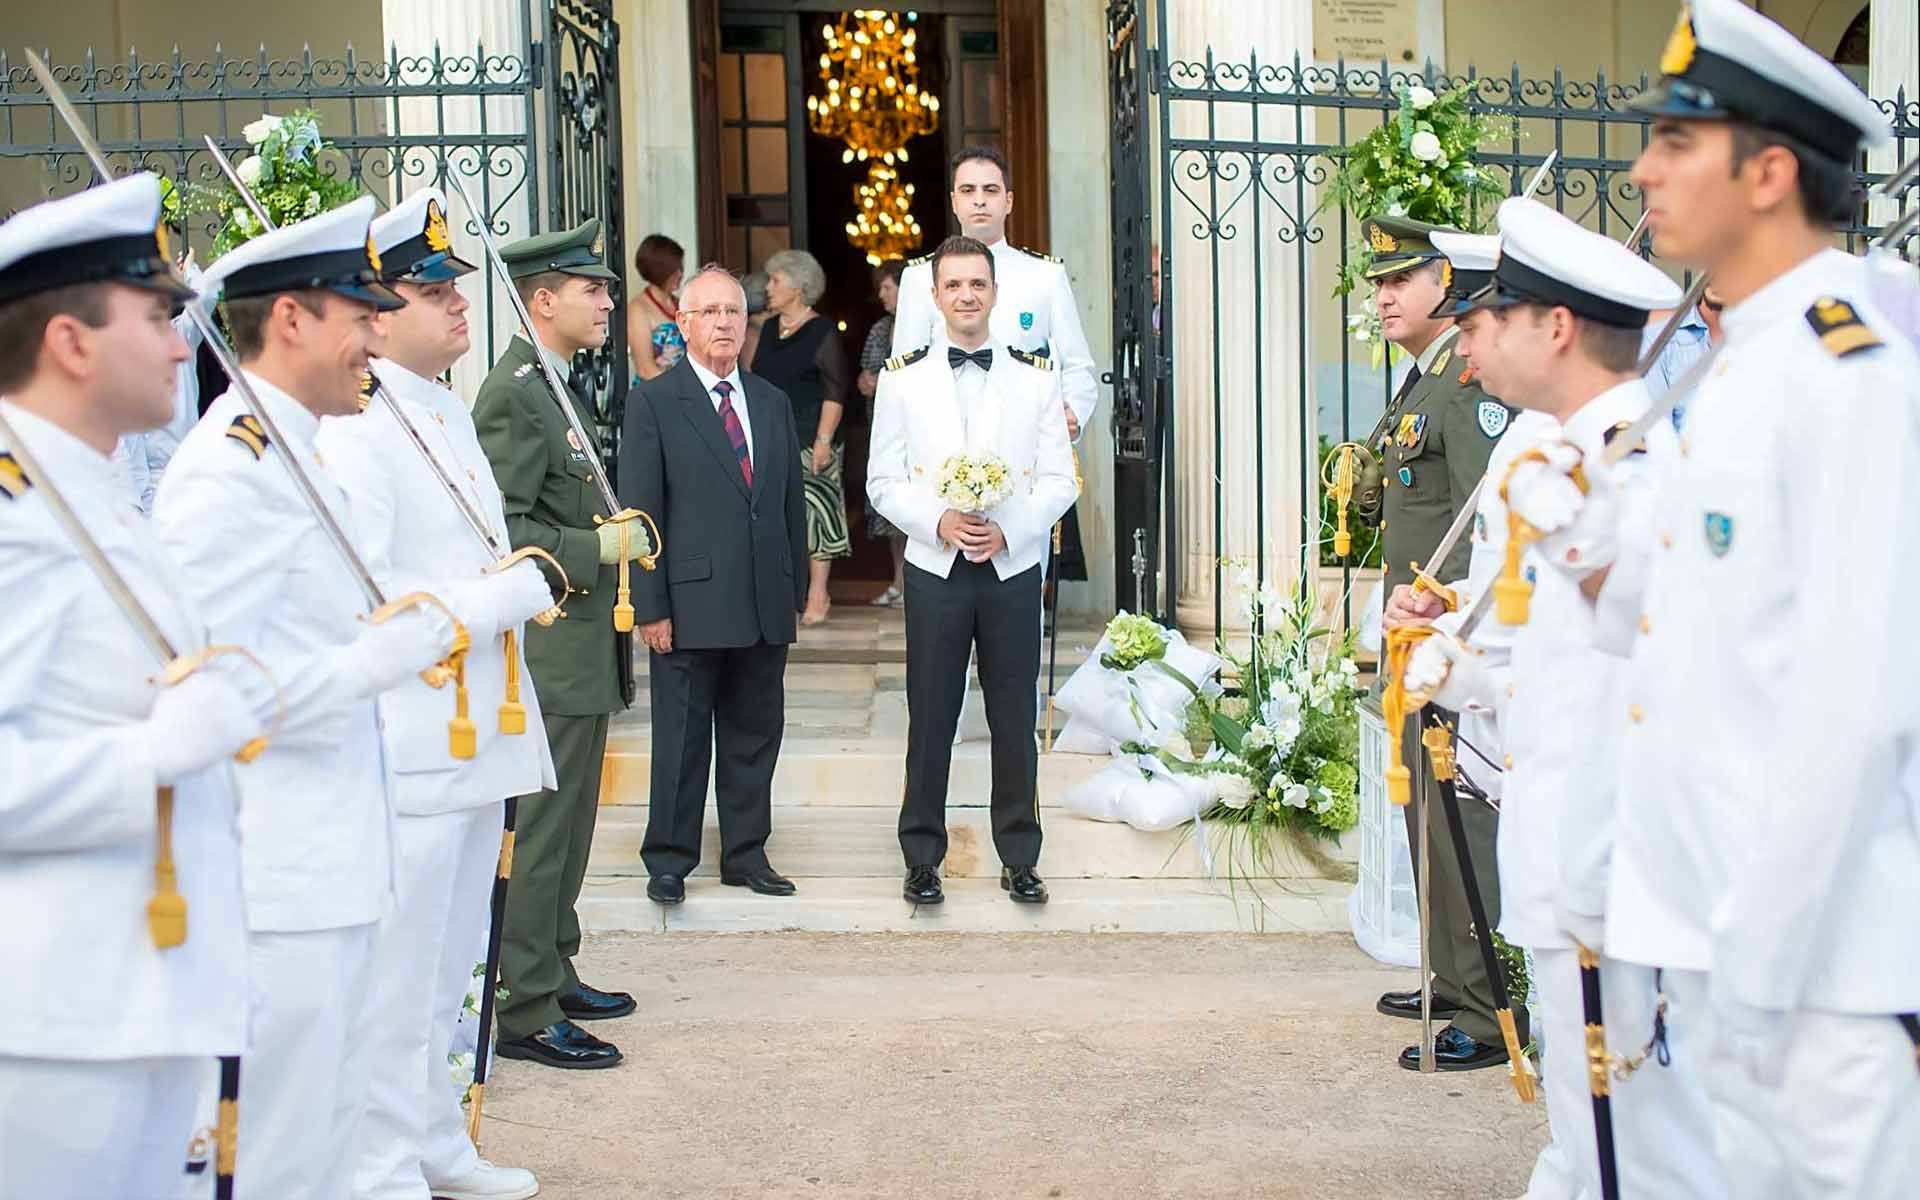 Wedding-ceremony-where-the-groom-is-a-naval-officer-and-special-customs-are-followed